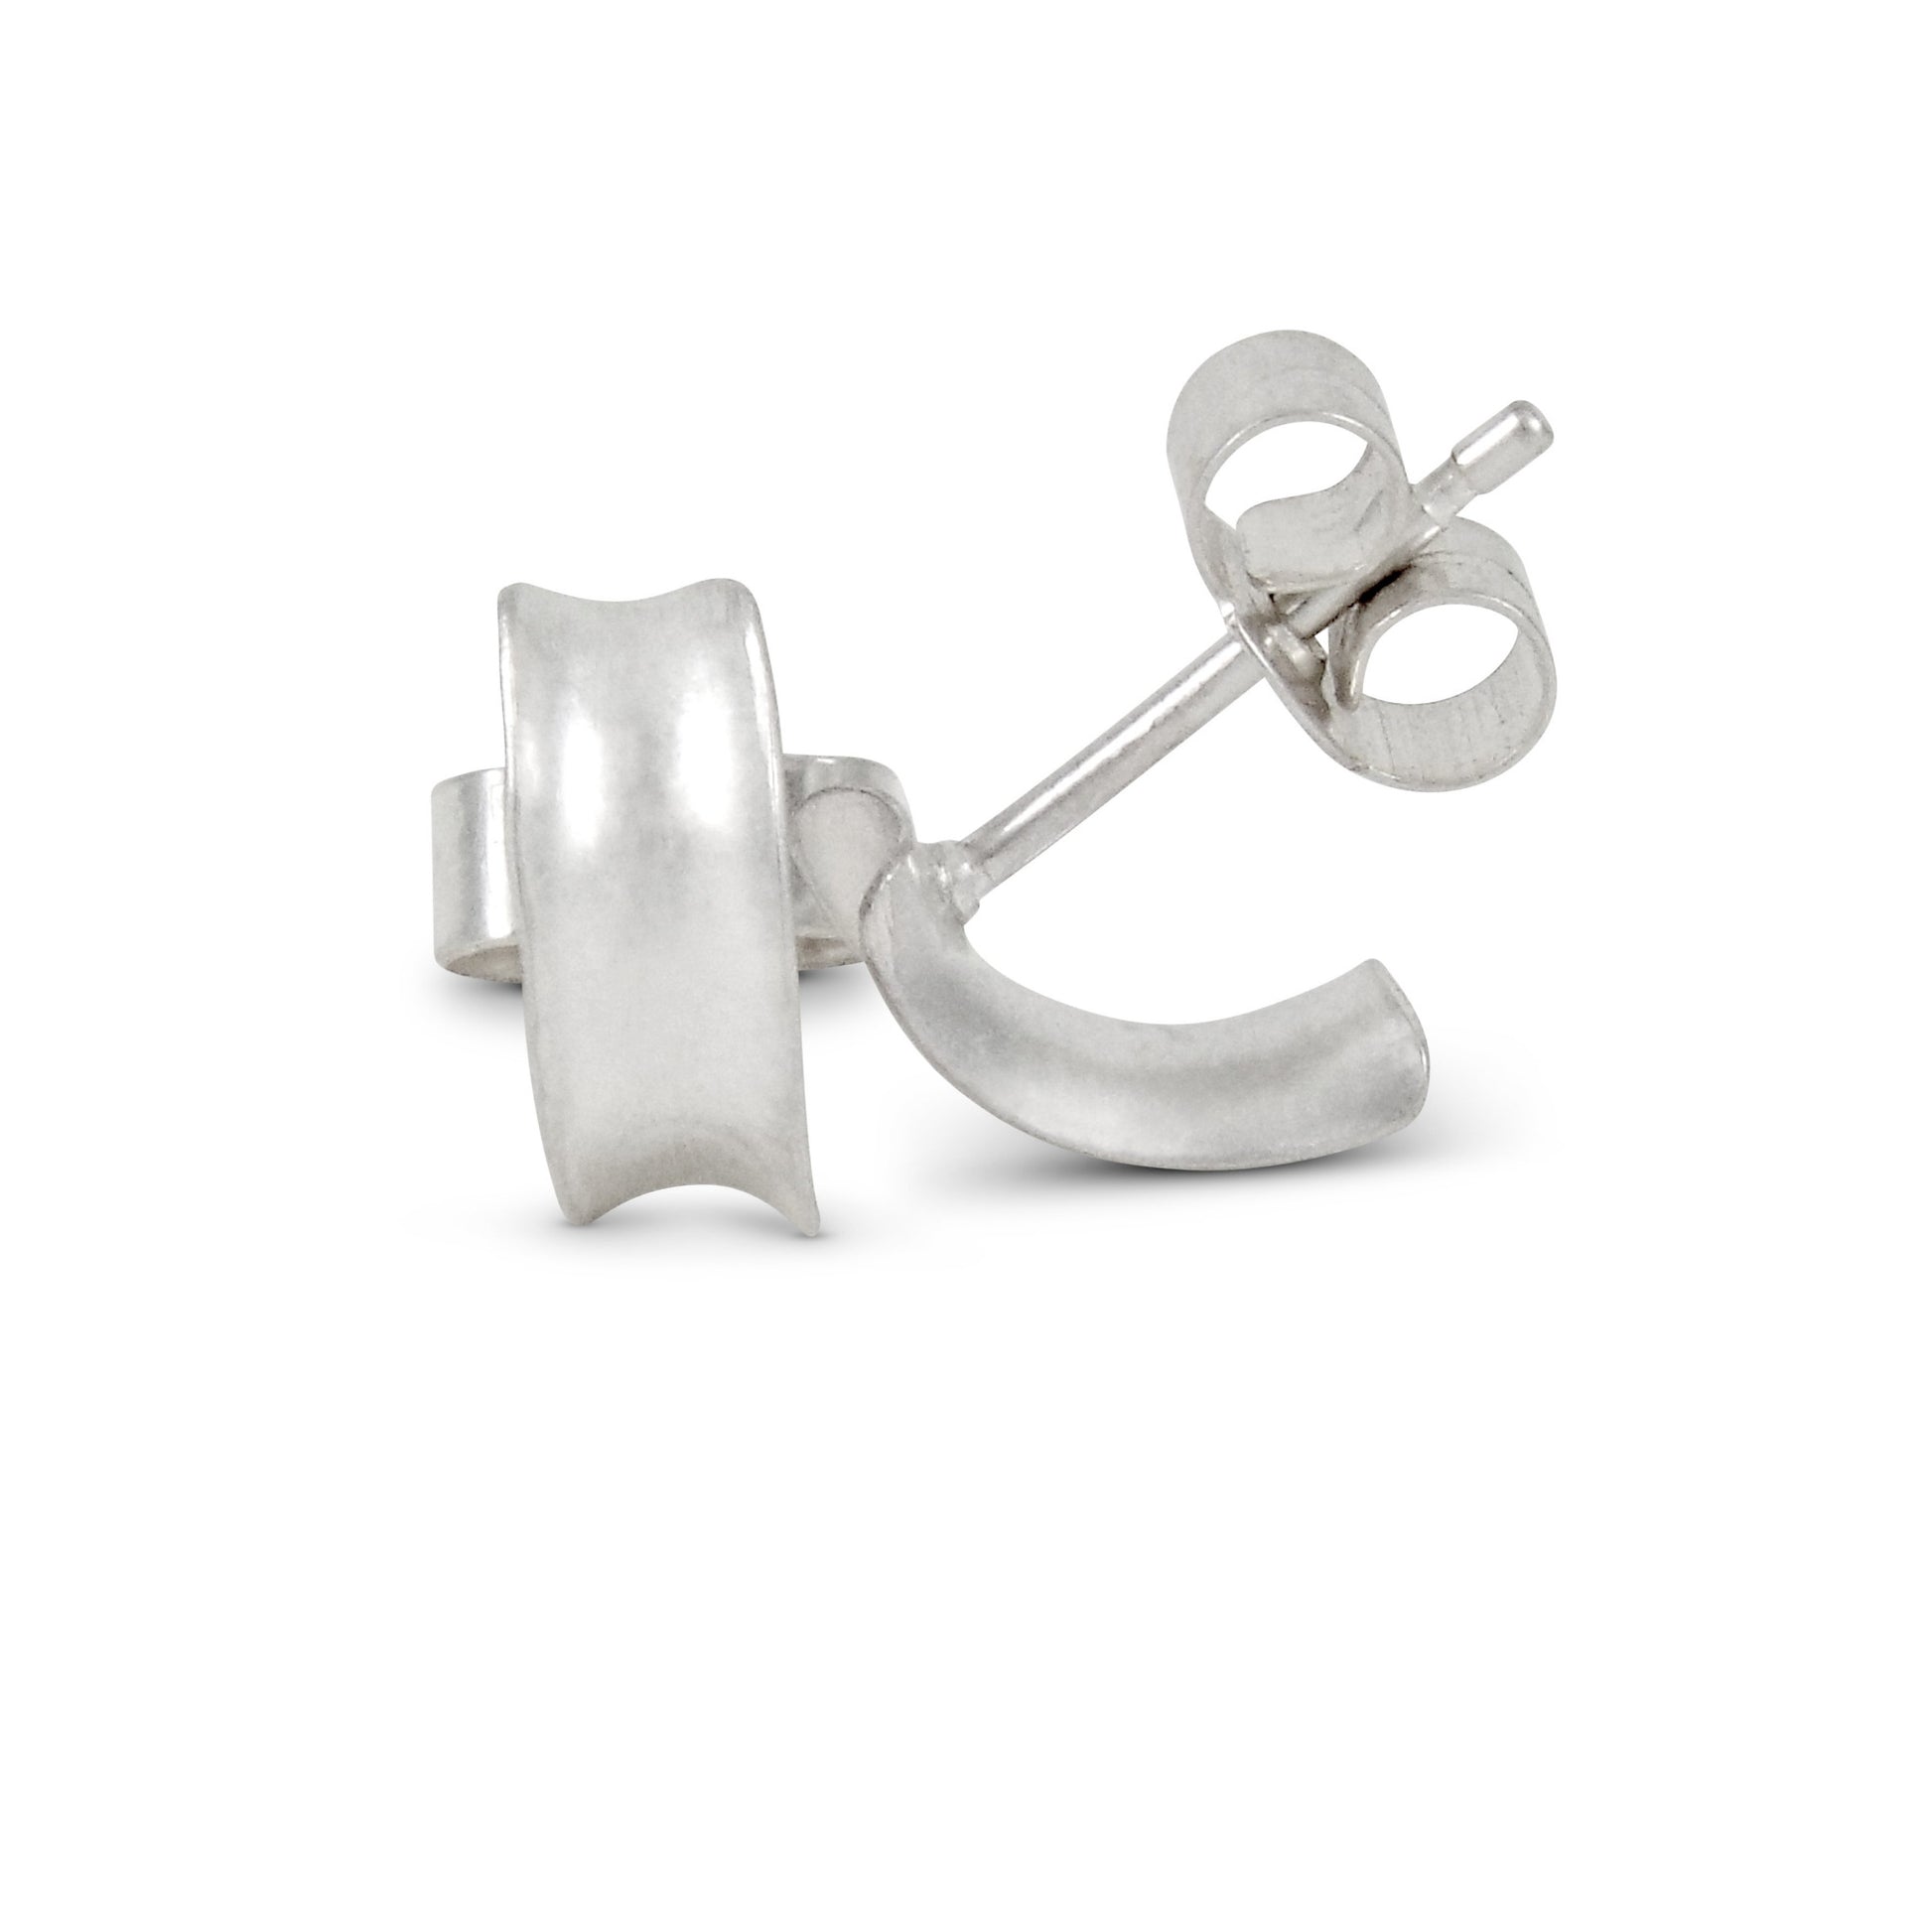 Demilune studs style 1, plain silver, showing  one stud from the front and one from the side with pin and butterfly